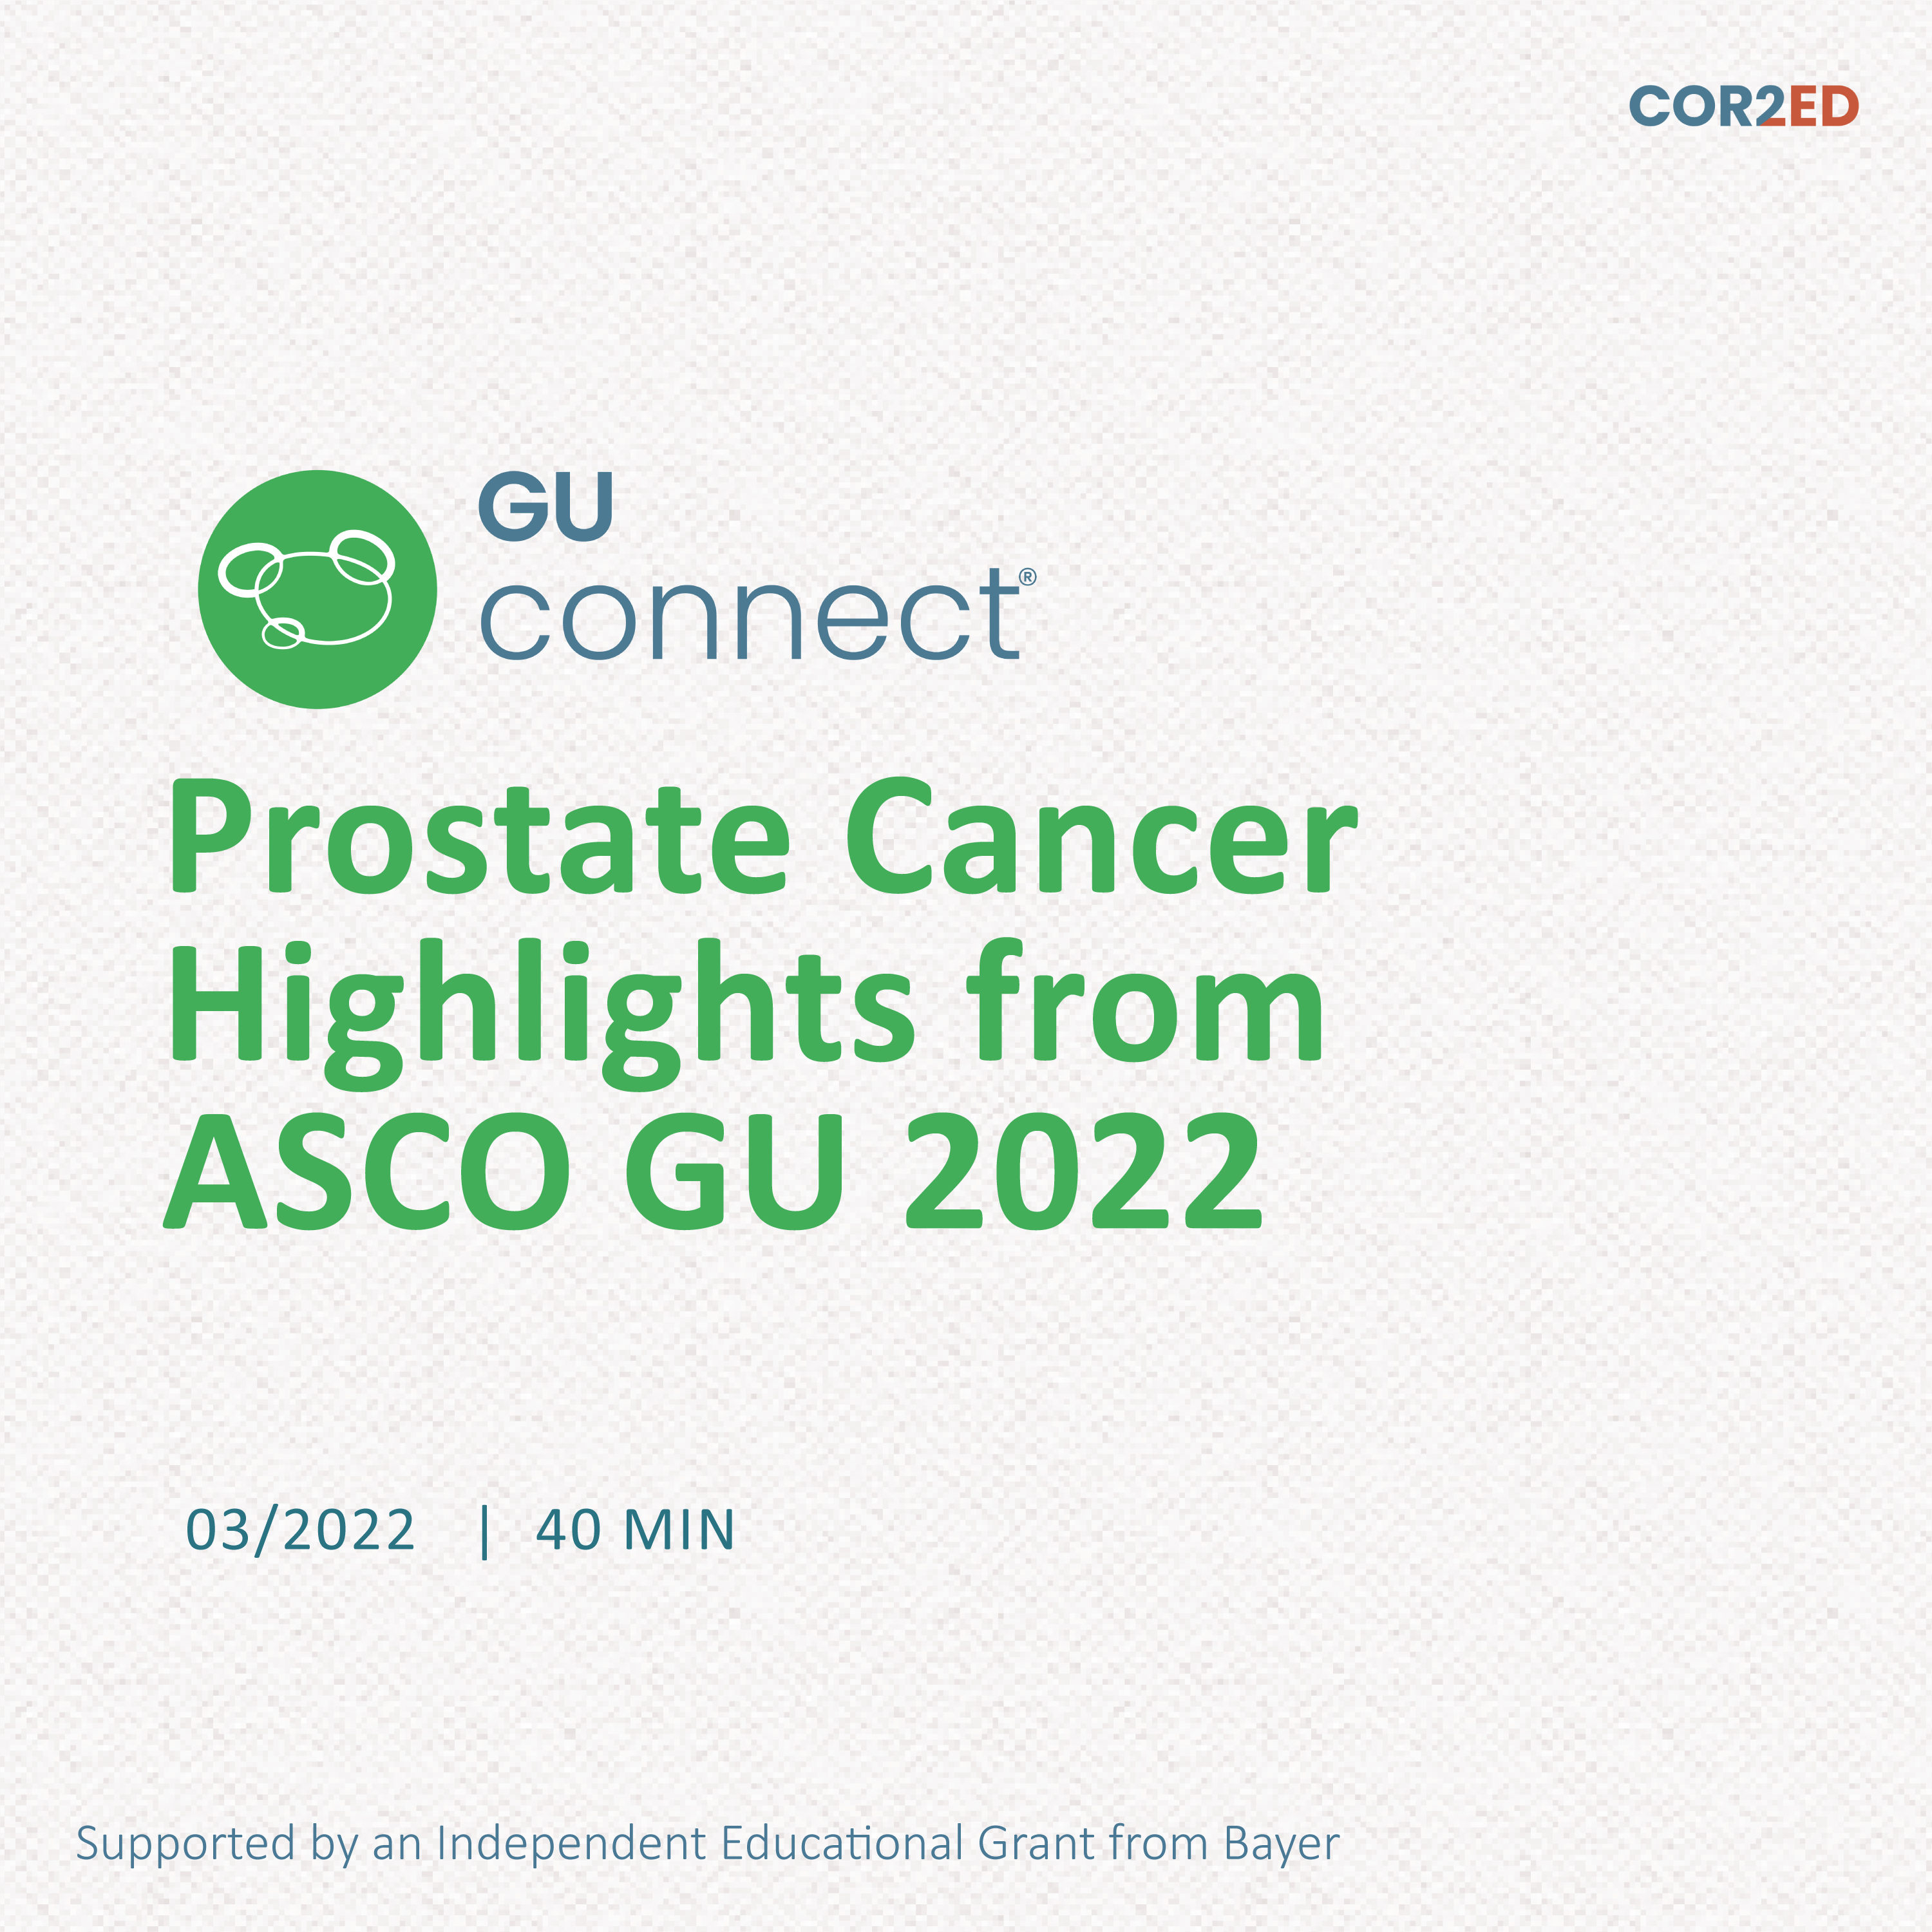 Prostate Cancer Highlights from ASCO GU 2022